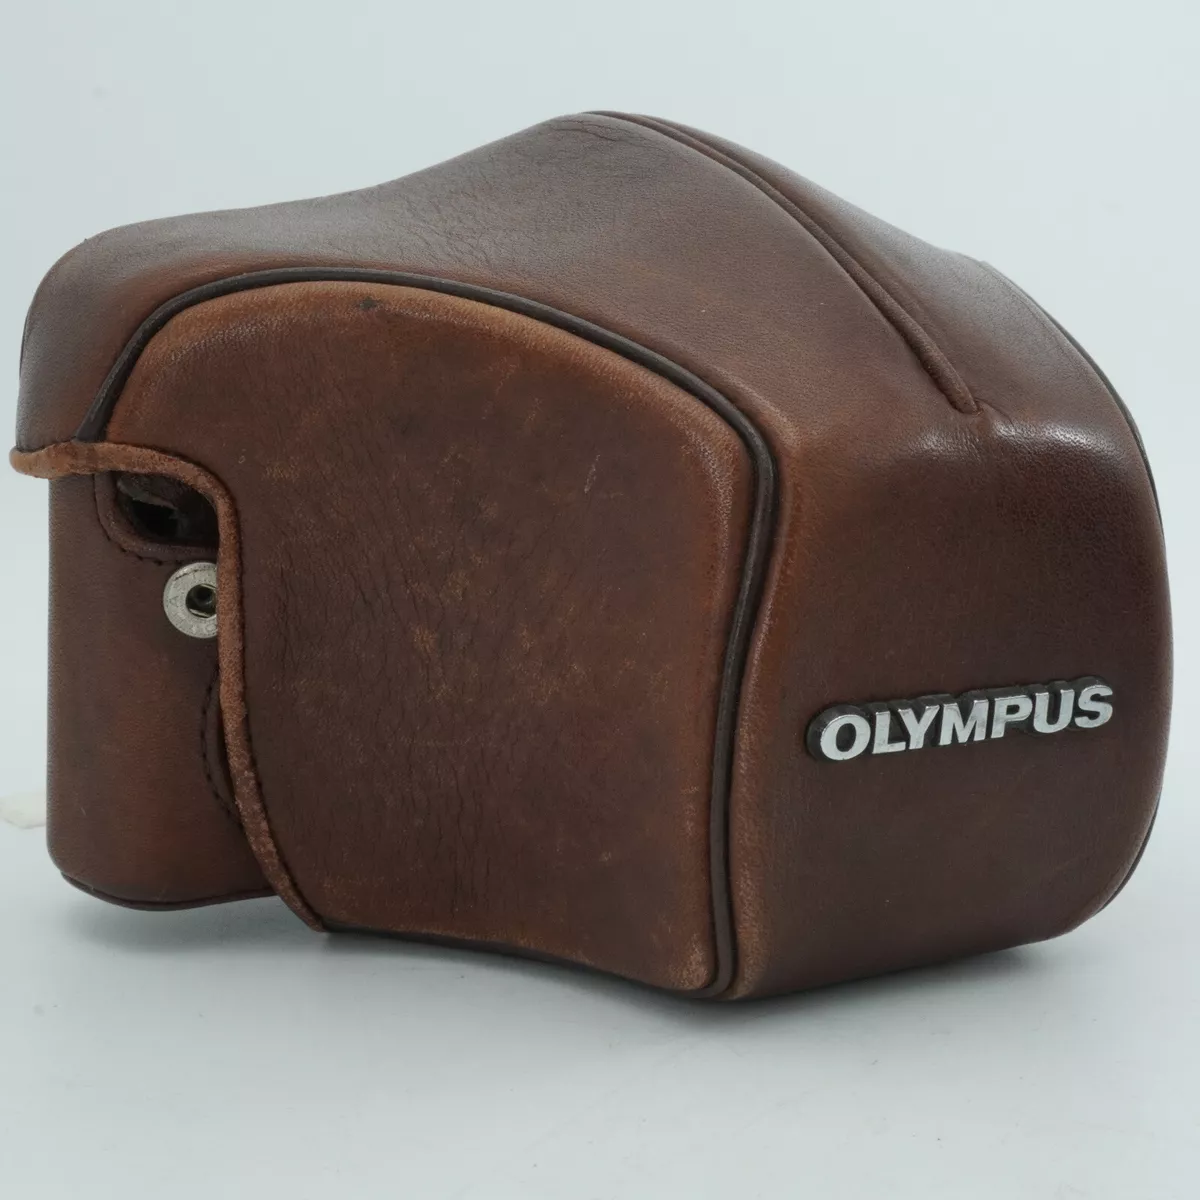 RARE!] Olympus OM-System Brown Leather Camera Case Fits OM 1 / 2